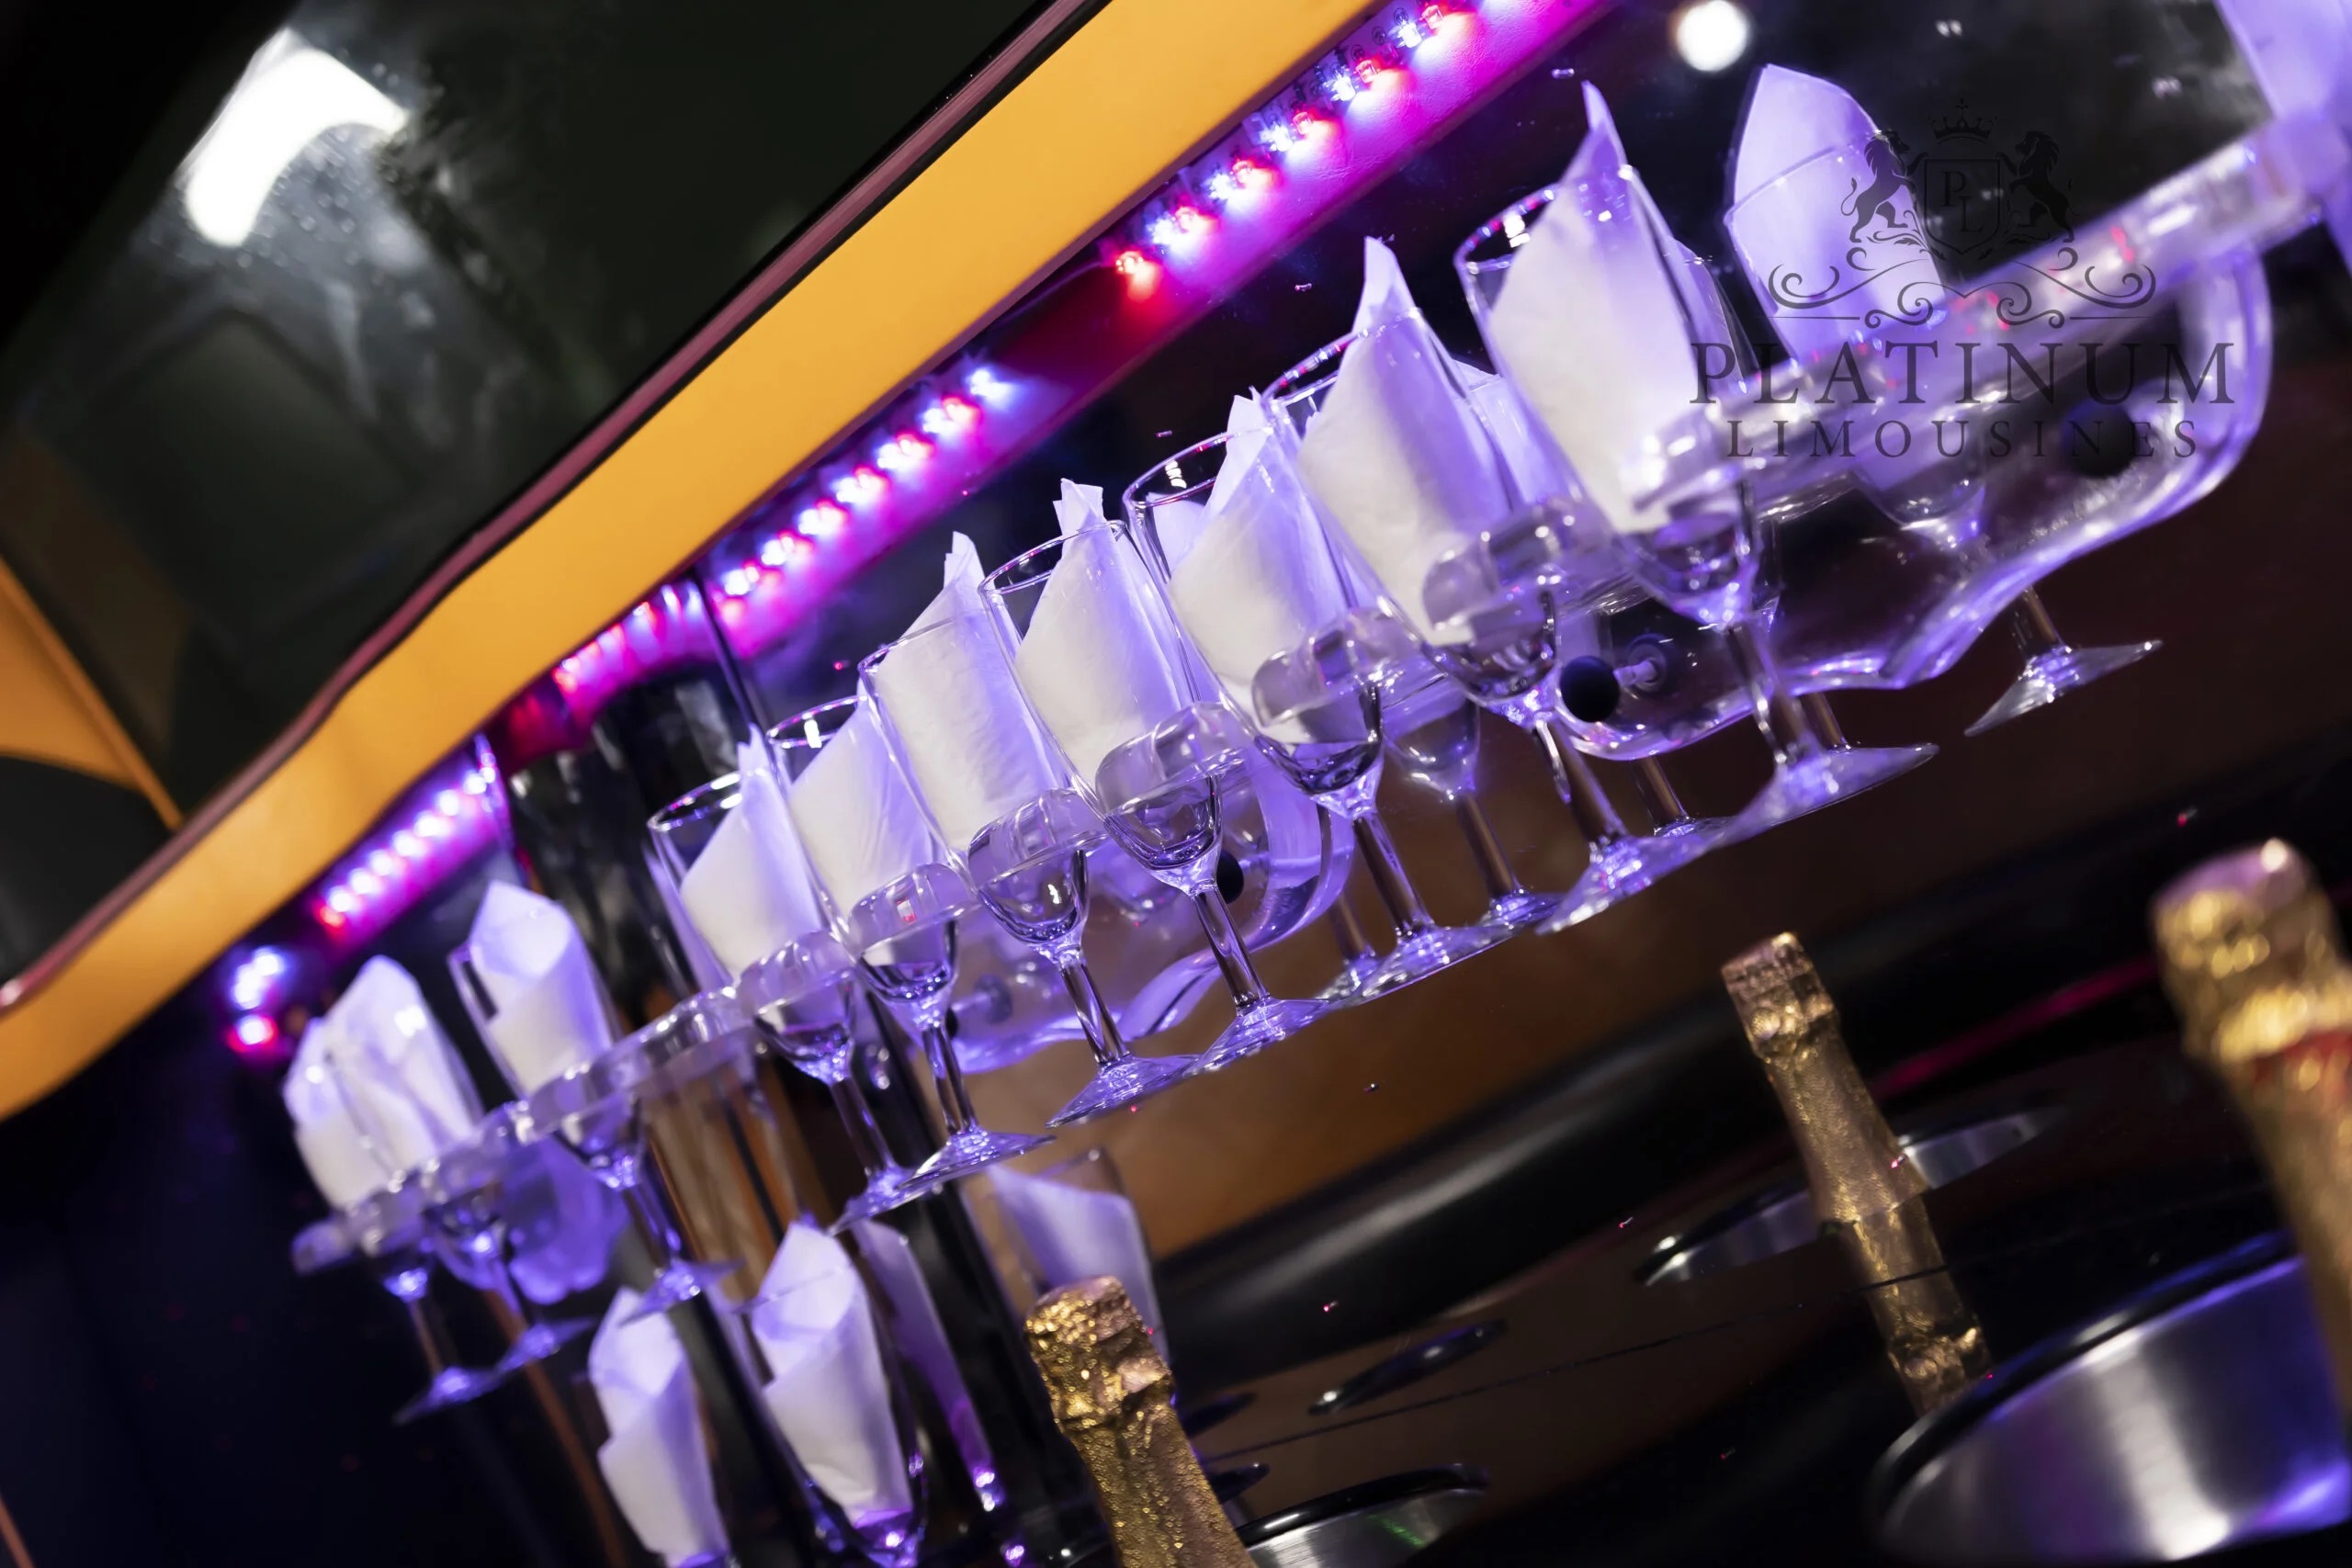 What to Expect When Hiring a Hummer Limo for a Night Out in the UK